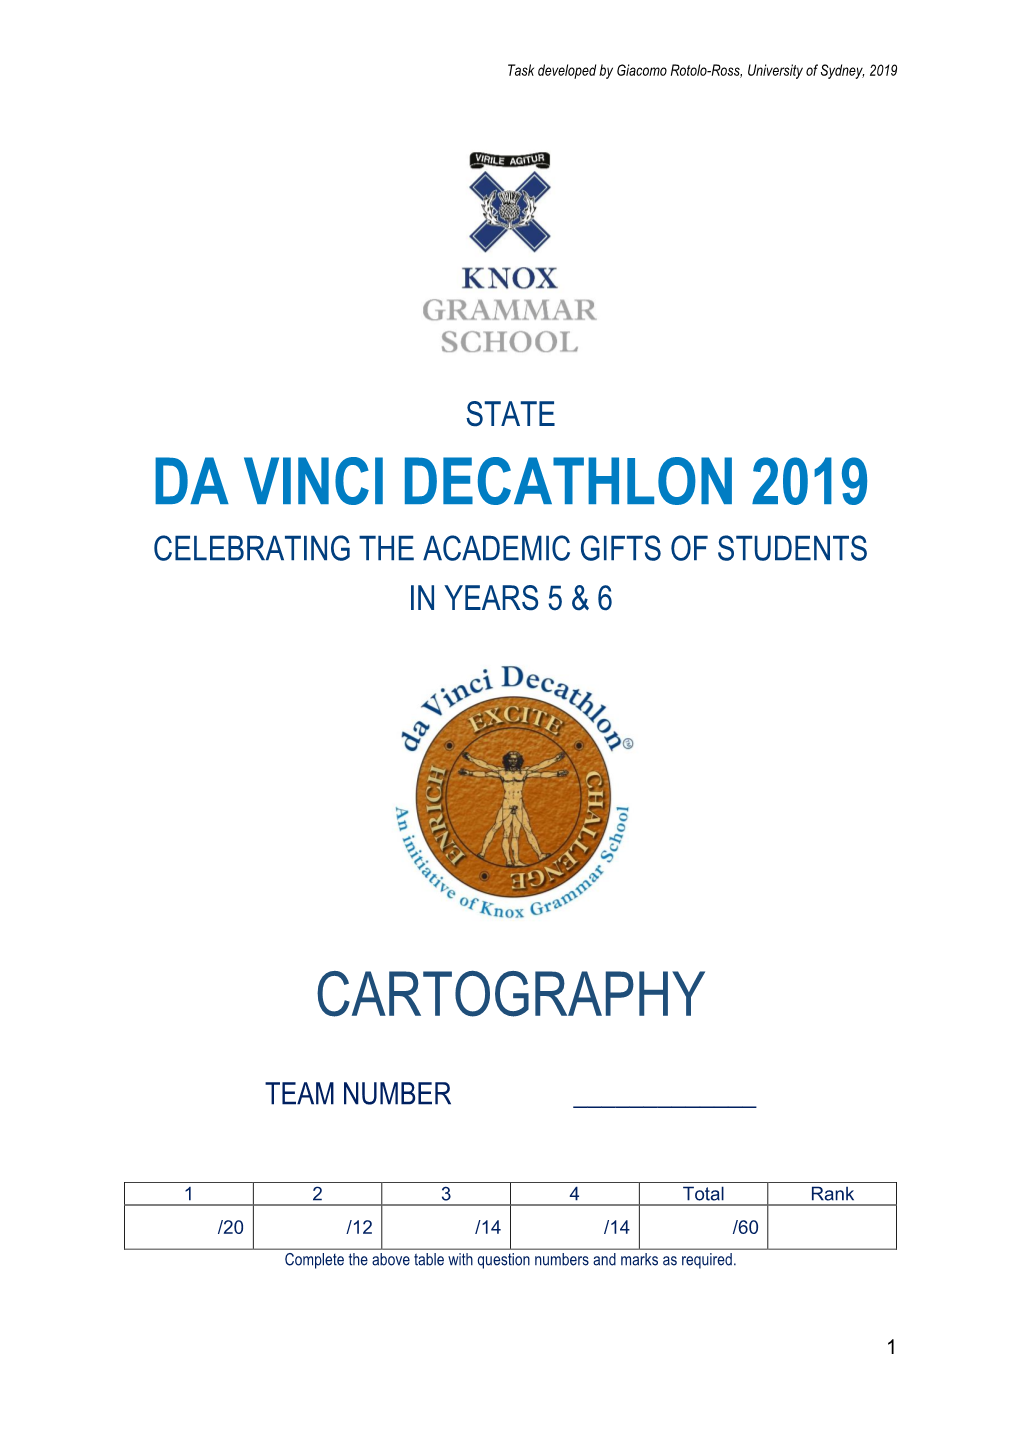 Da Vinci Decathlon 2019 Celebrating the Academic Gifts of Students in Years 5 & 6